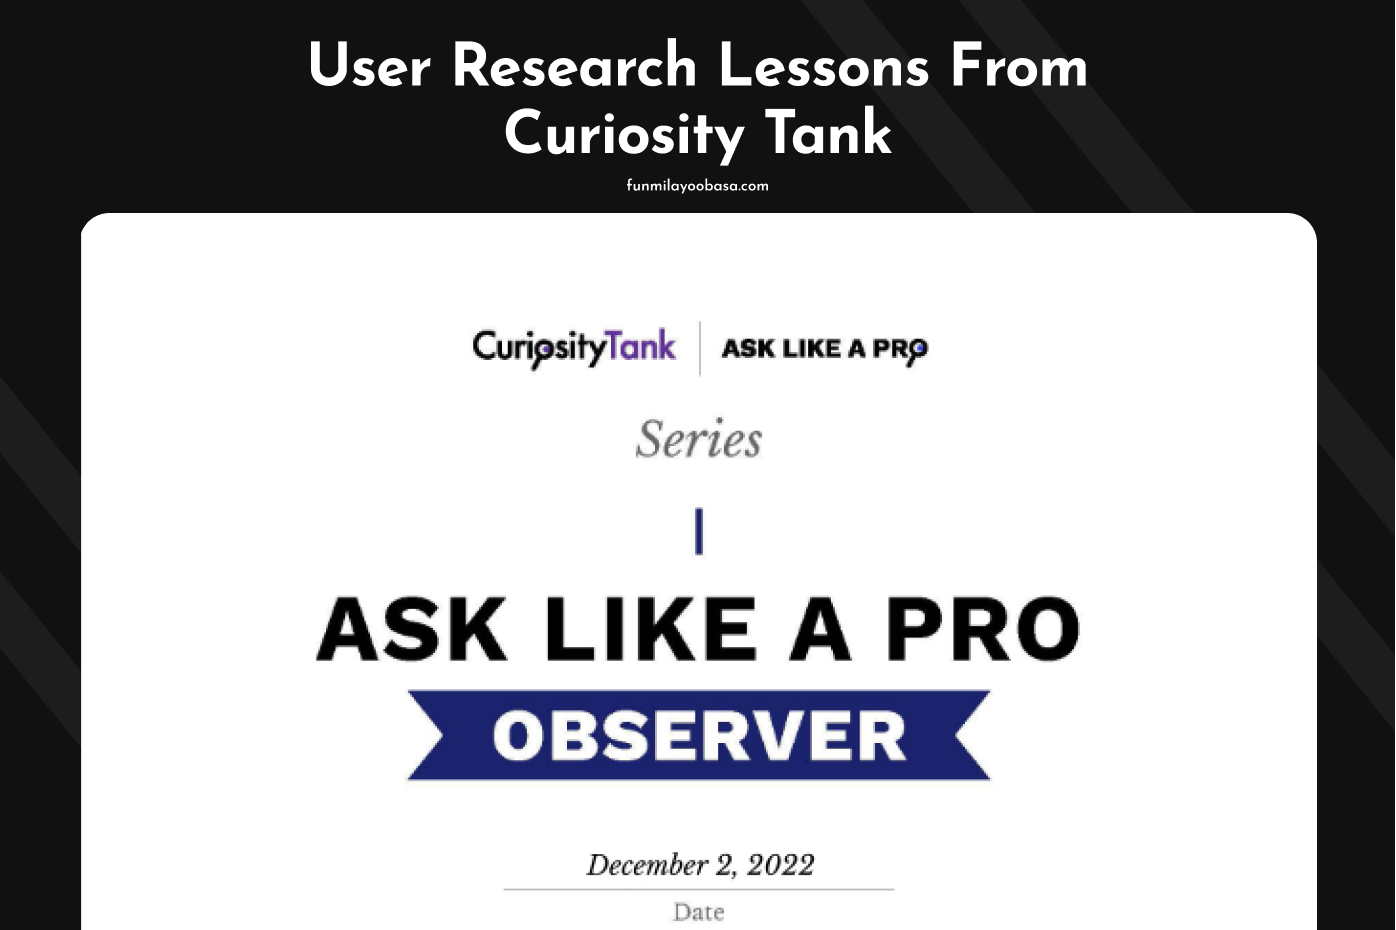 User Research Lessons From Curiosity Tank